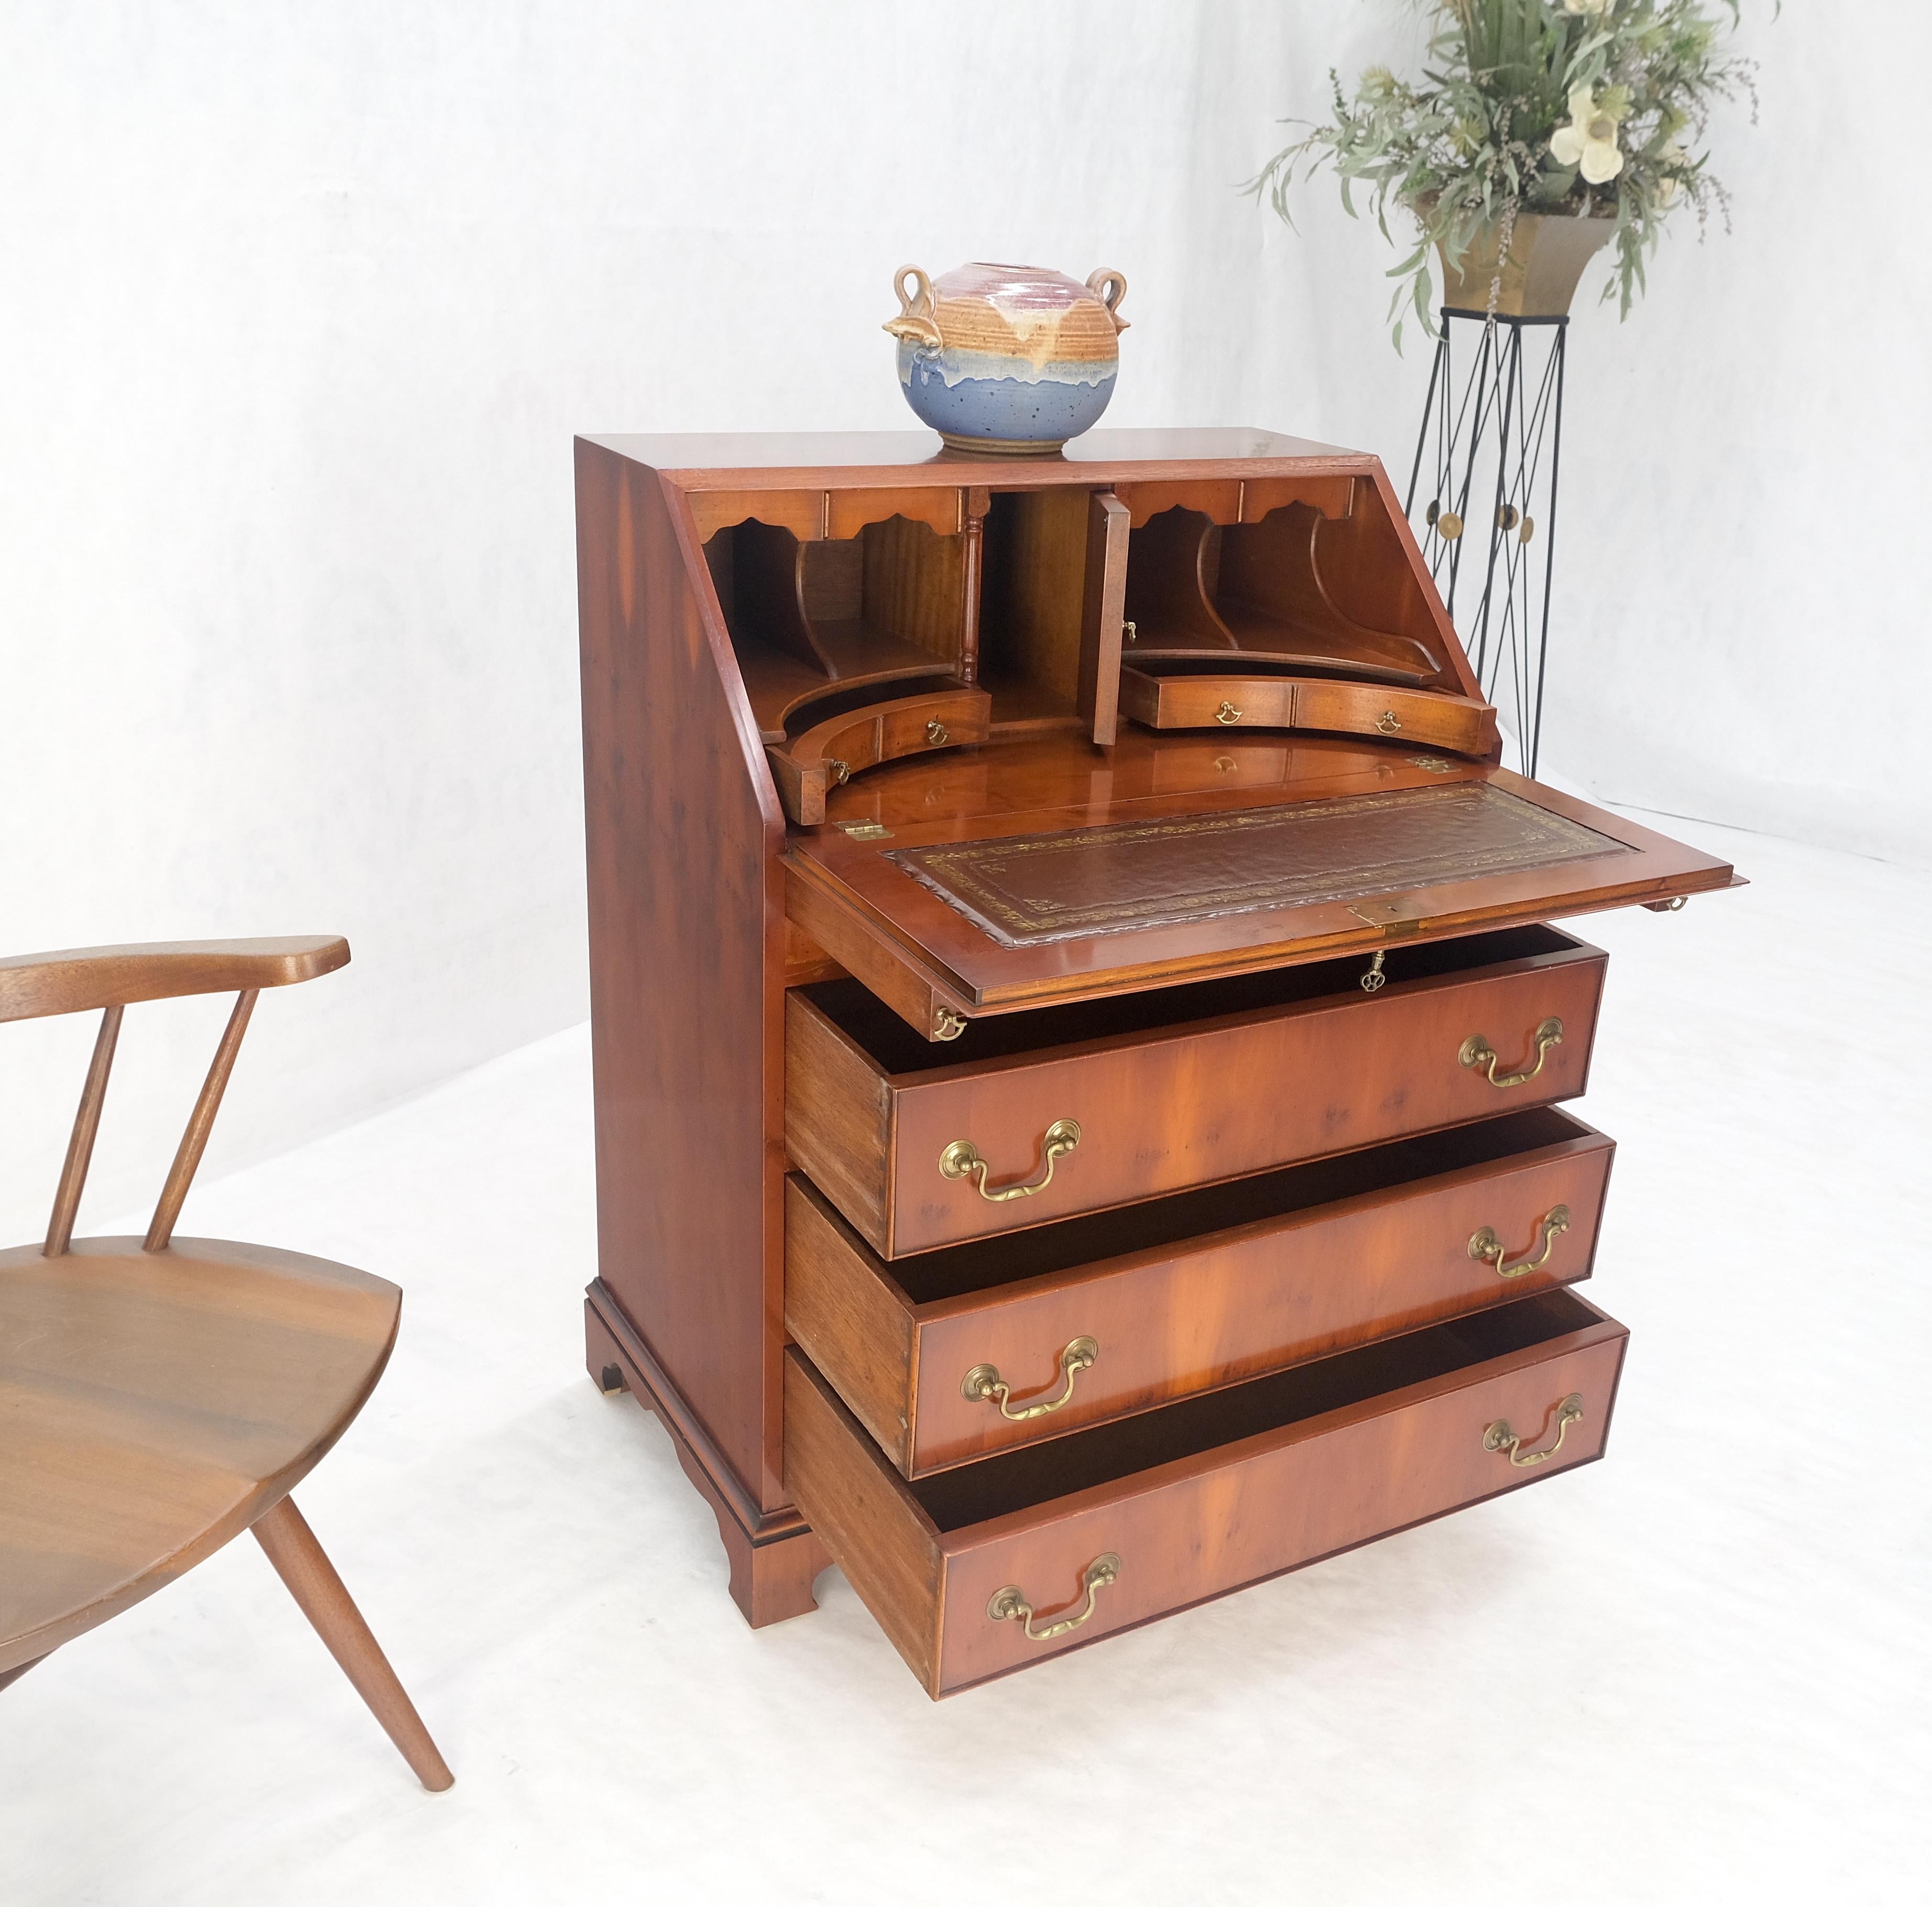 Yew Wood Leather Top Drop Front Secretary Desk 3 Drawers Brass Hardware MINT! In Good Condition For Sale In Rockaway, NJ